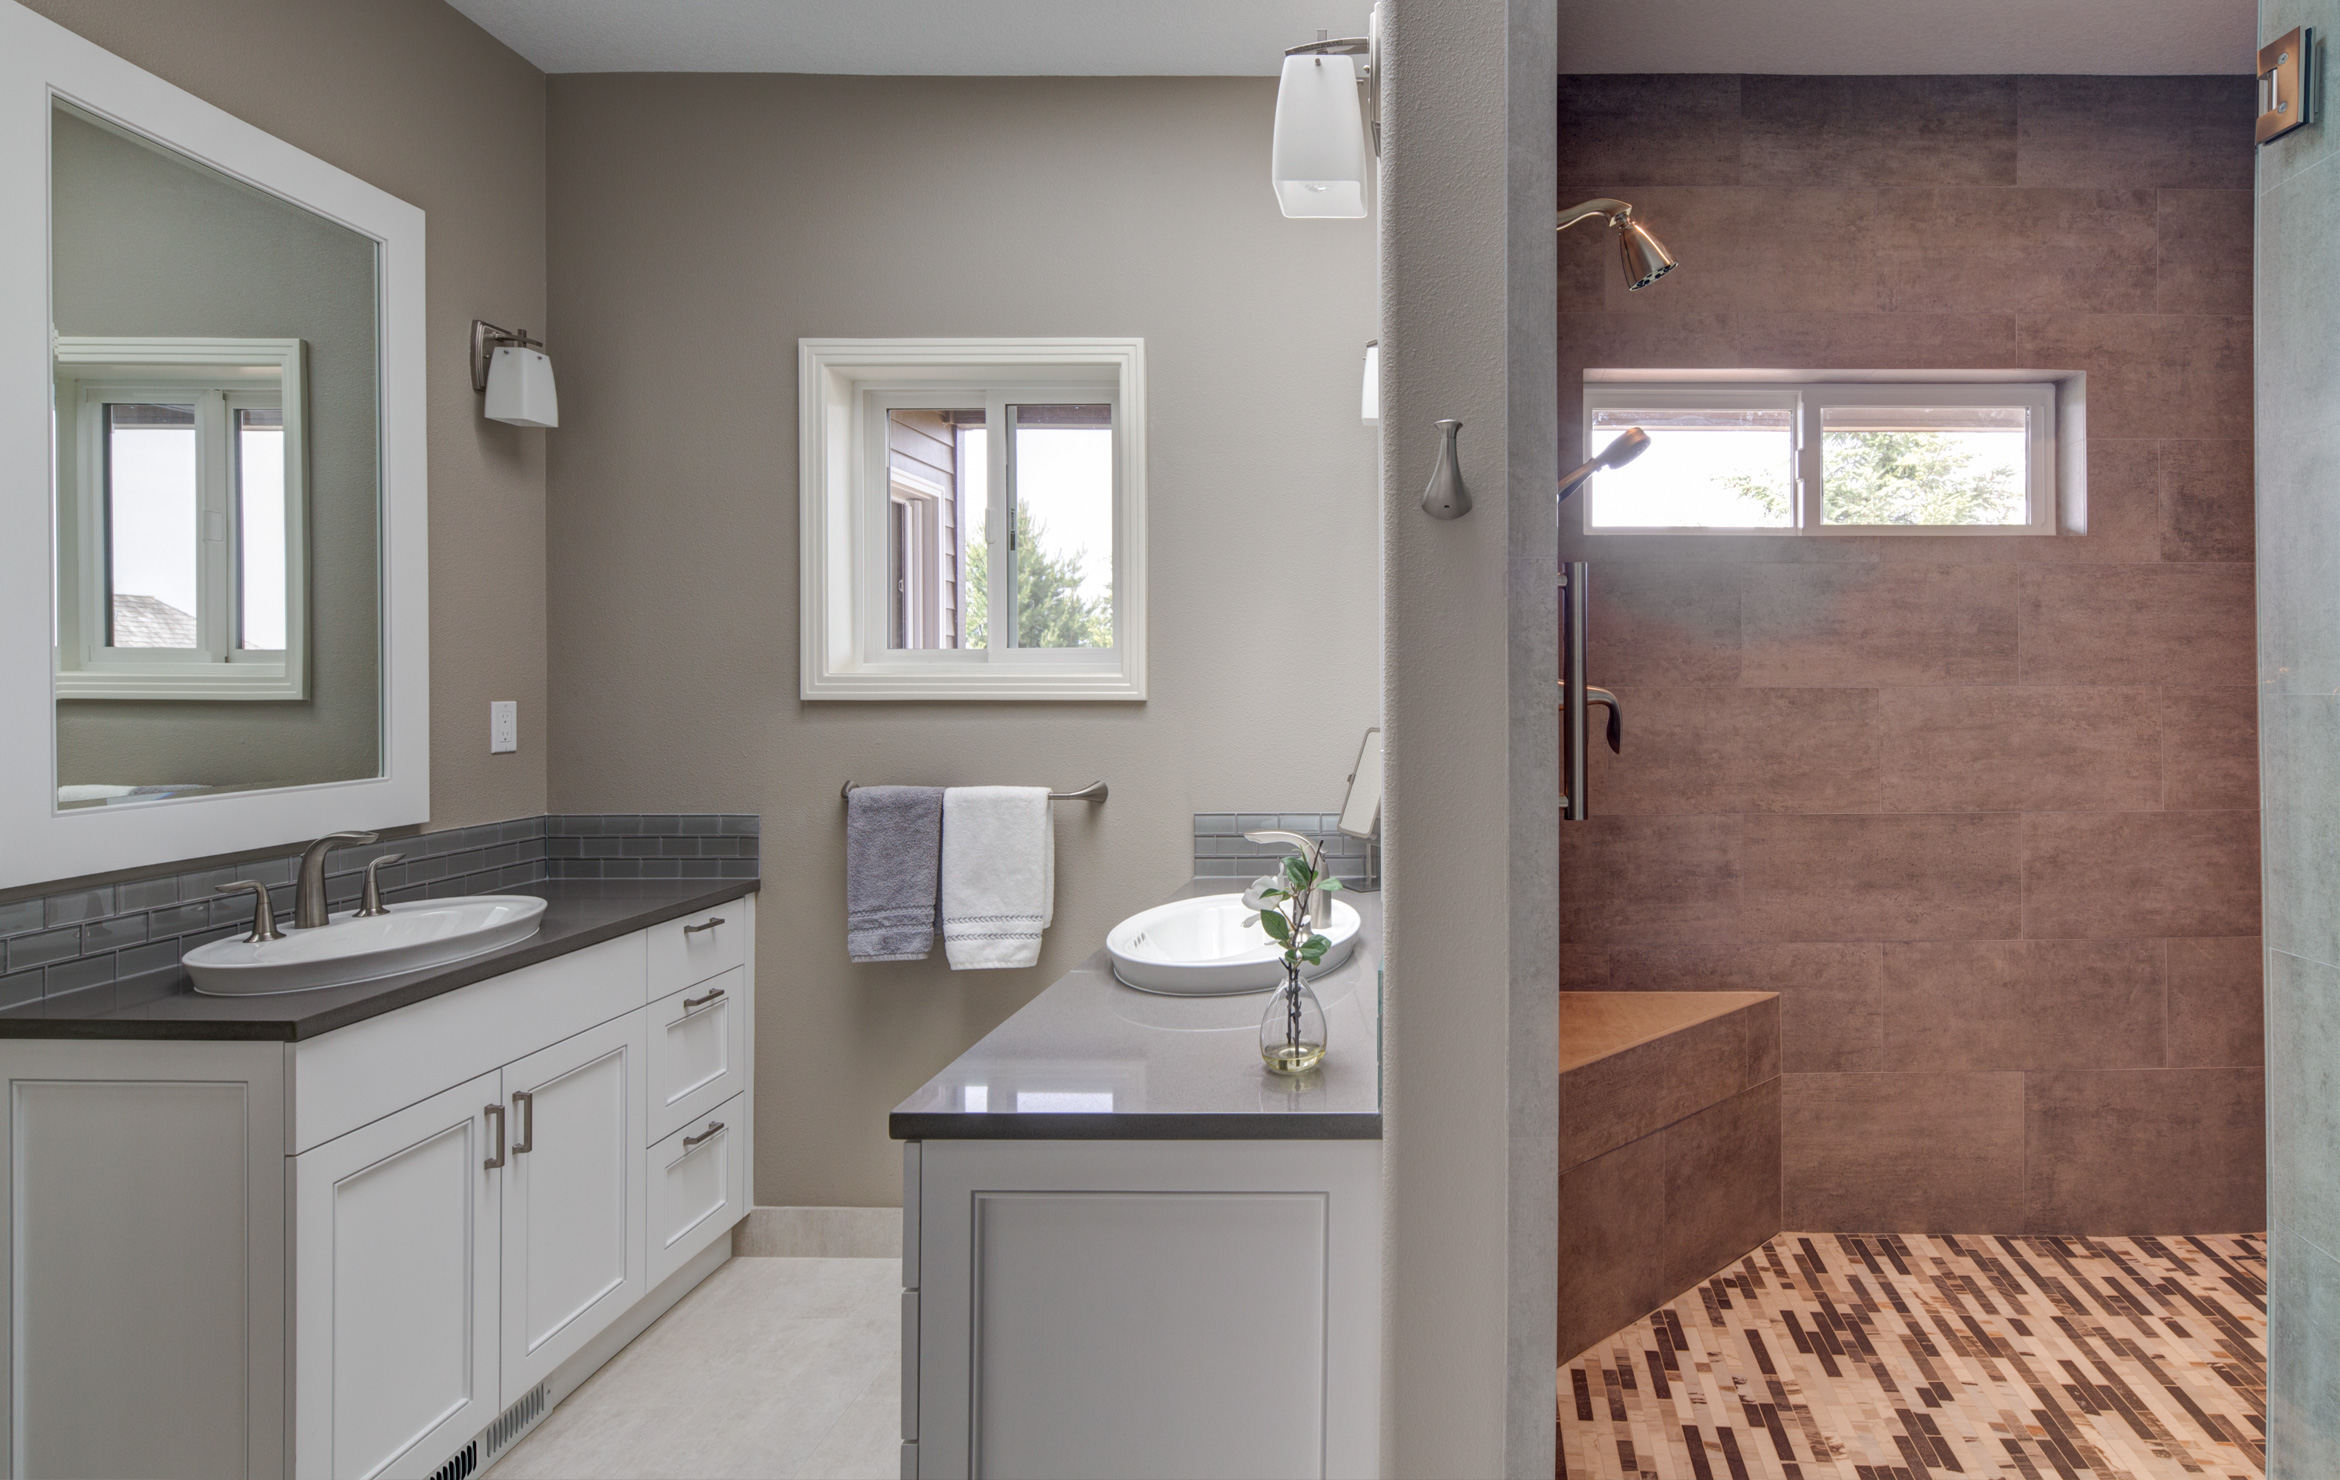 Bathroom Remodel Completes Home Transformation in Tigard, OR